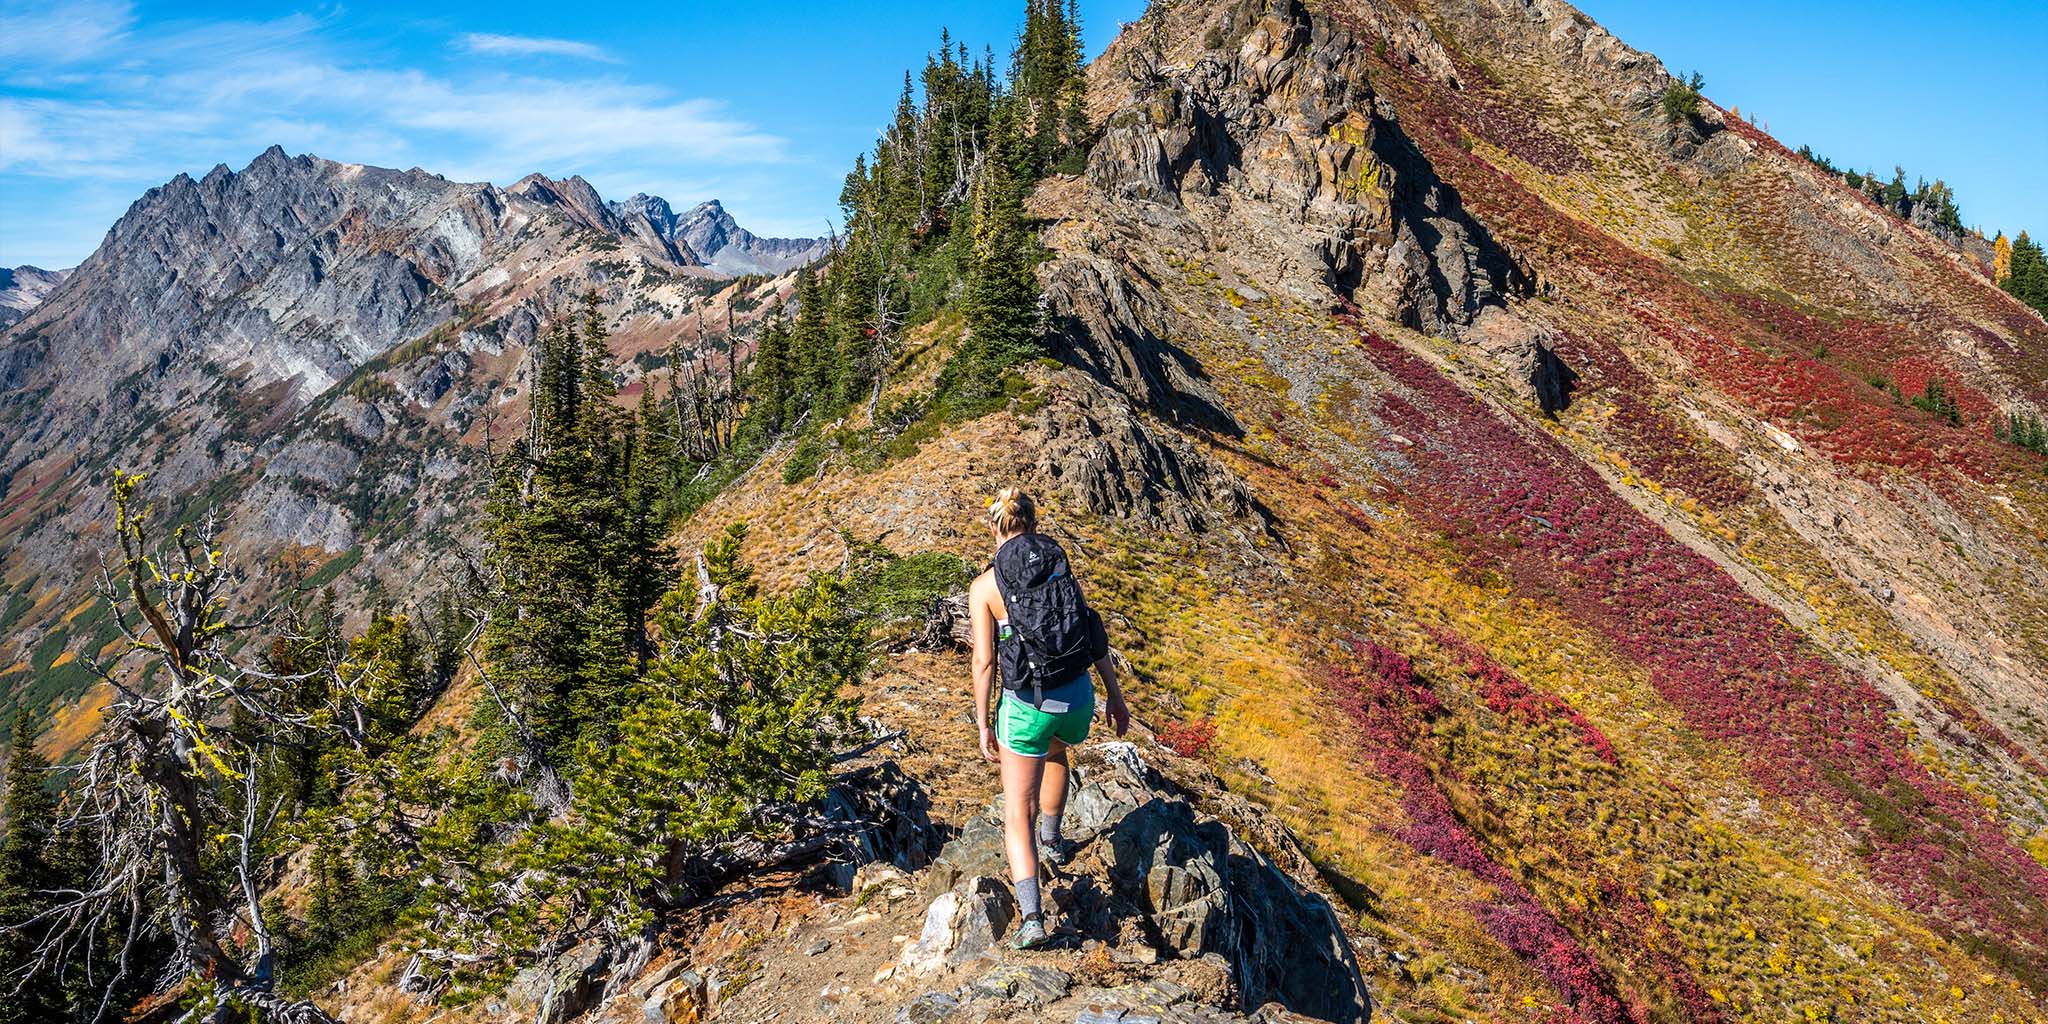 THE 2022 HYPERLITE MOUNTAIN GEAR GUIDE FOR A PACKED, PICTURE-PERFECT DAY HIKE (LUNCH INCLUDED)